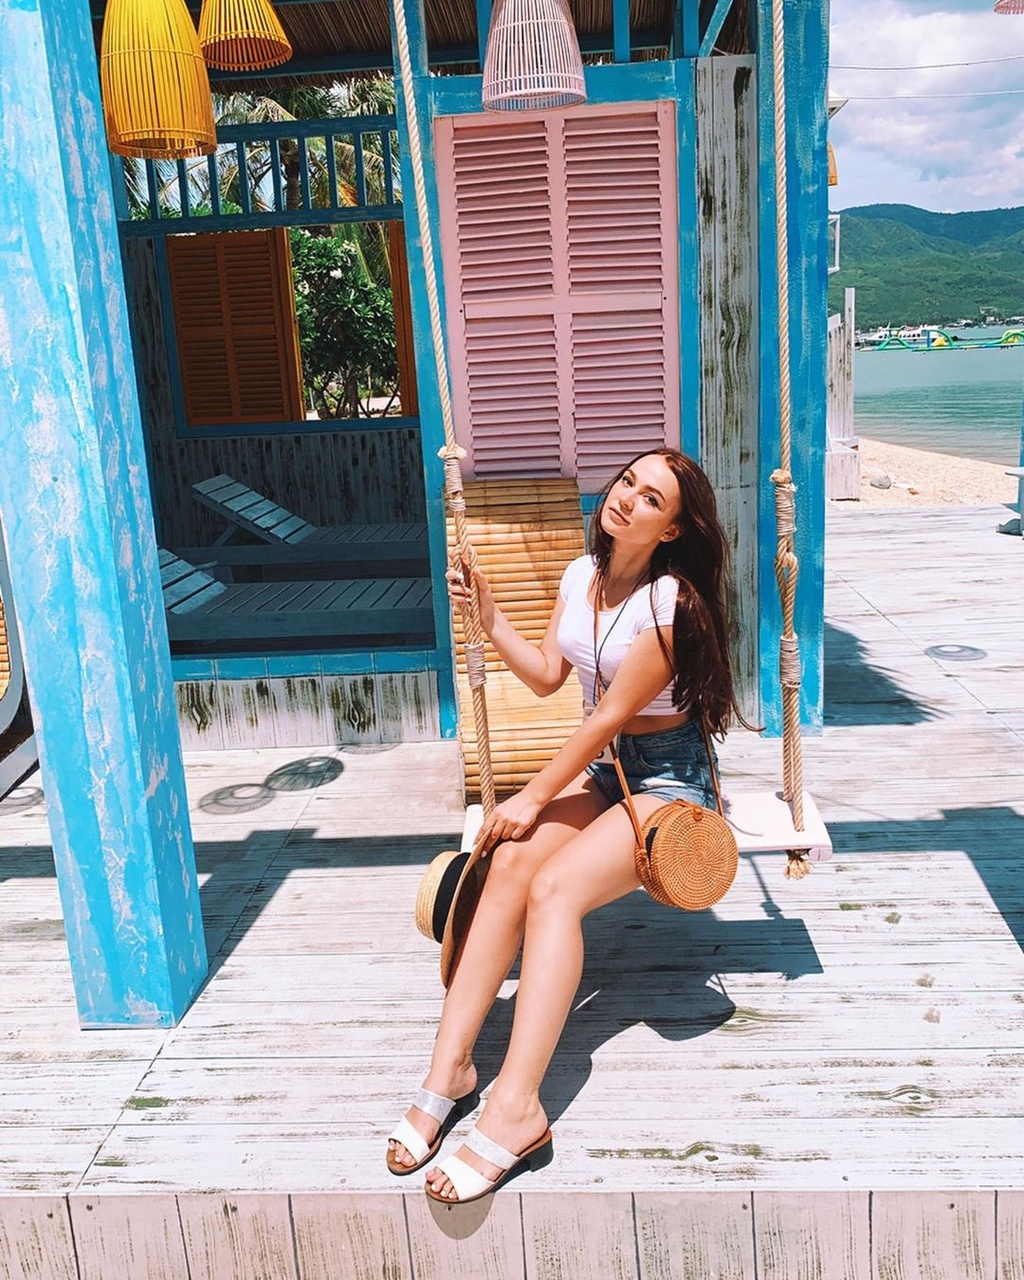 The island offers guests plenty of space in order to snap selfies. (Photo: _anechka _)